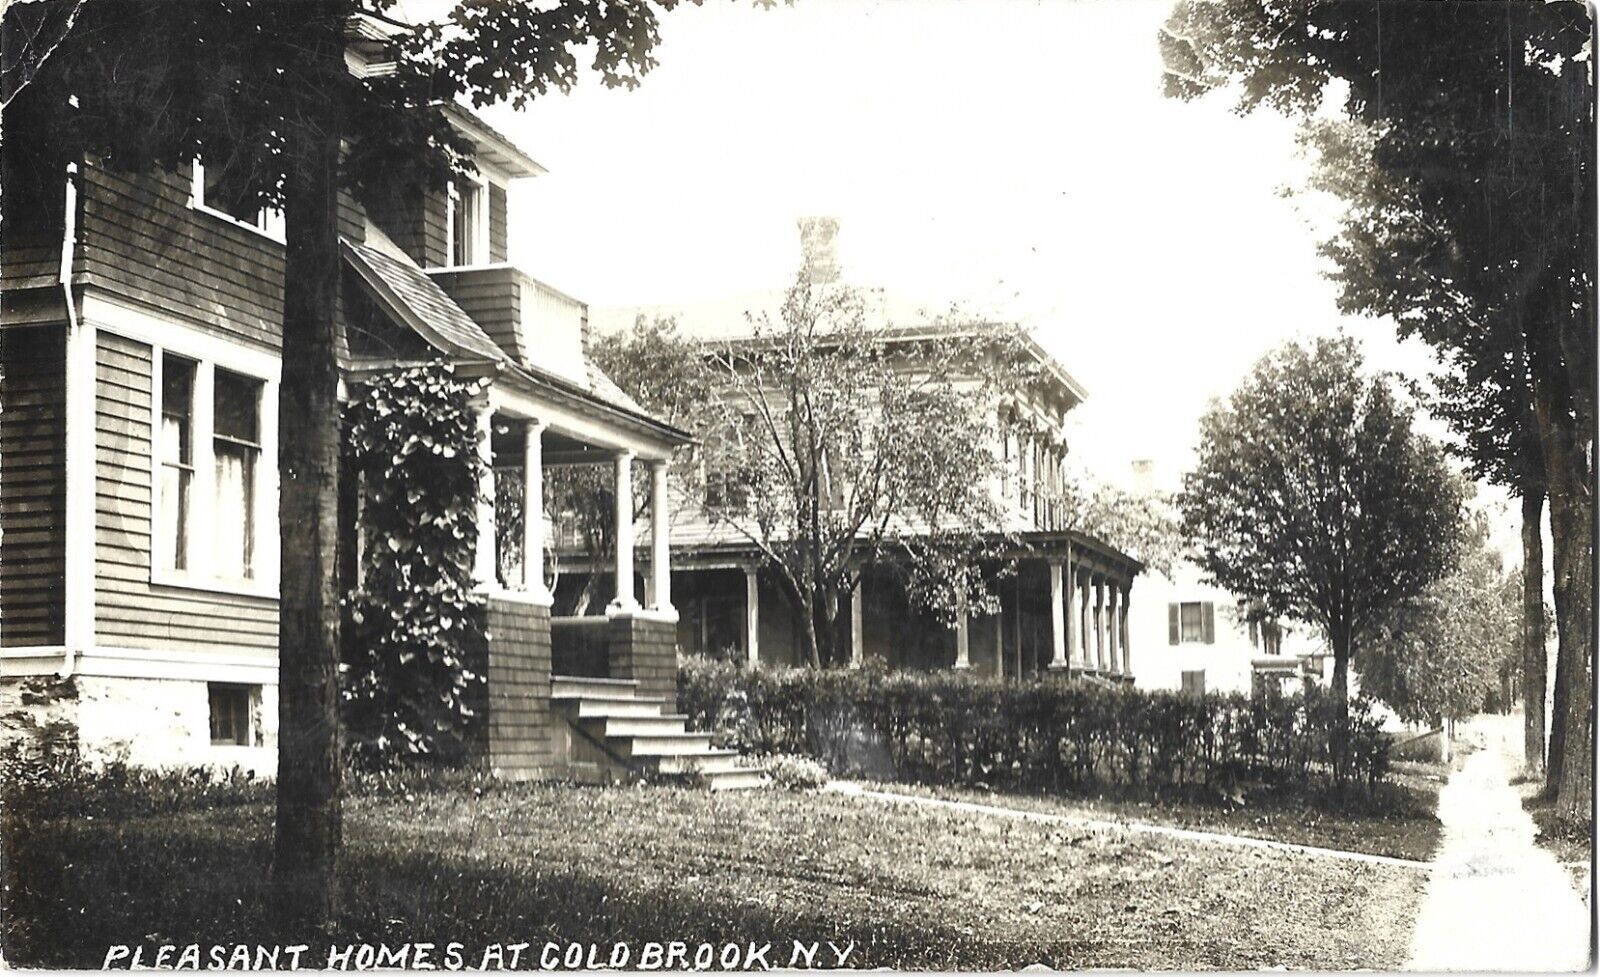 Old Victorian homes in Cold Brook NY; nice 1911 RPPC